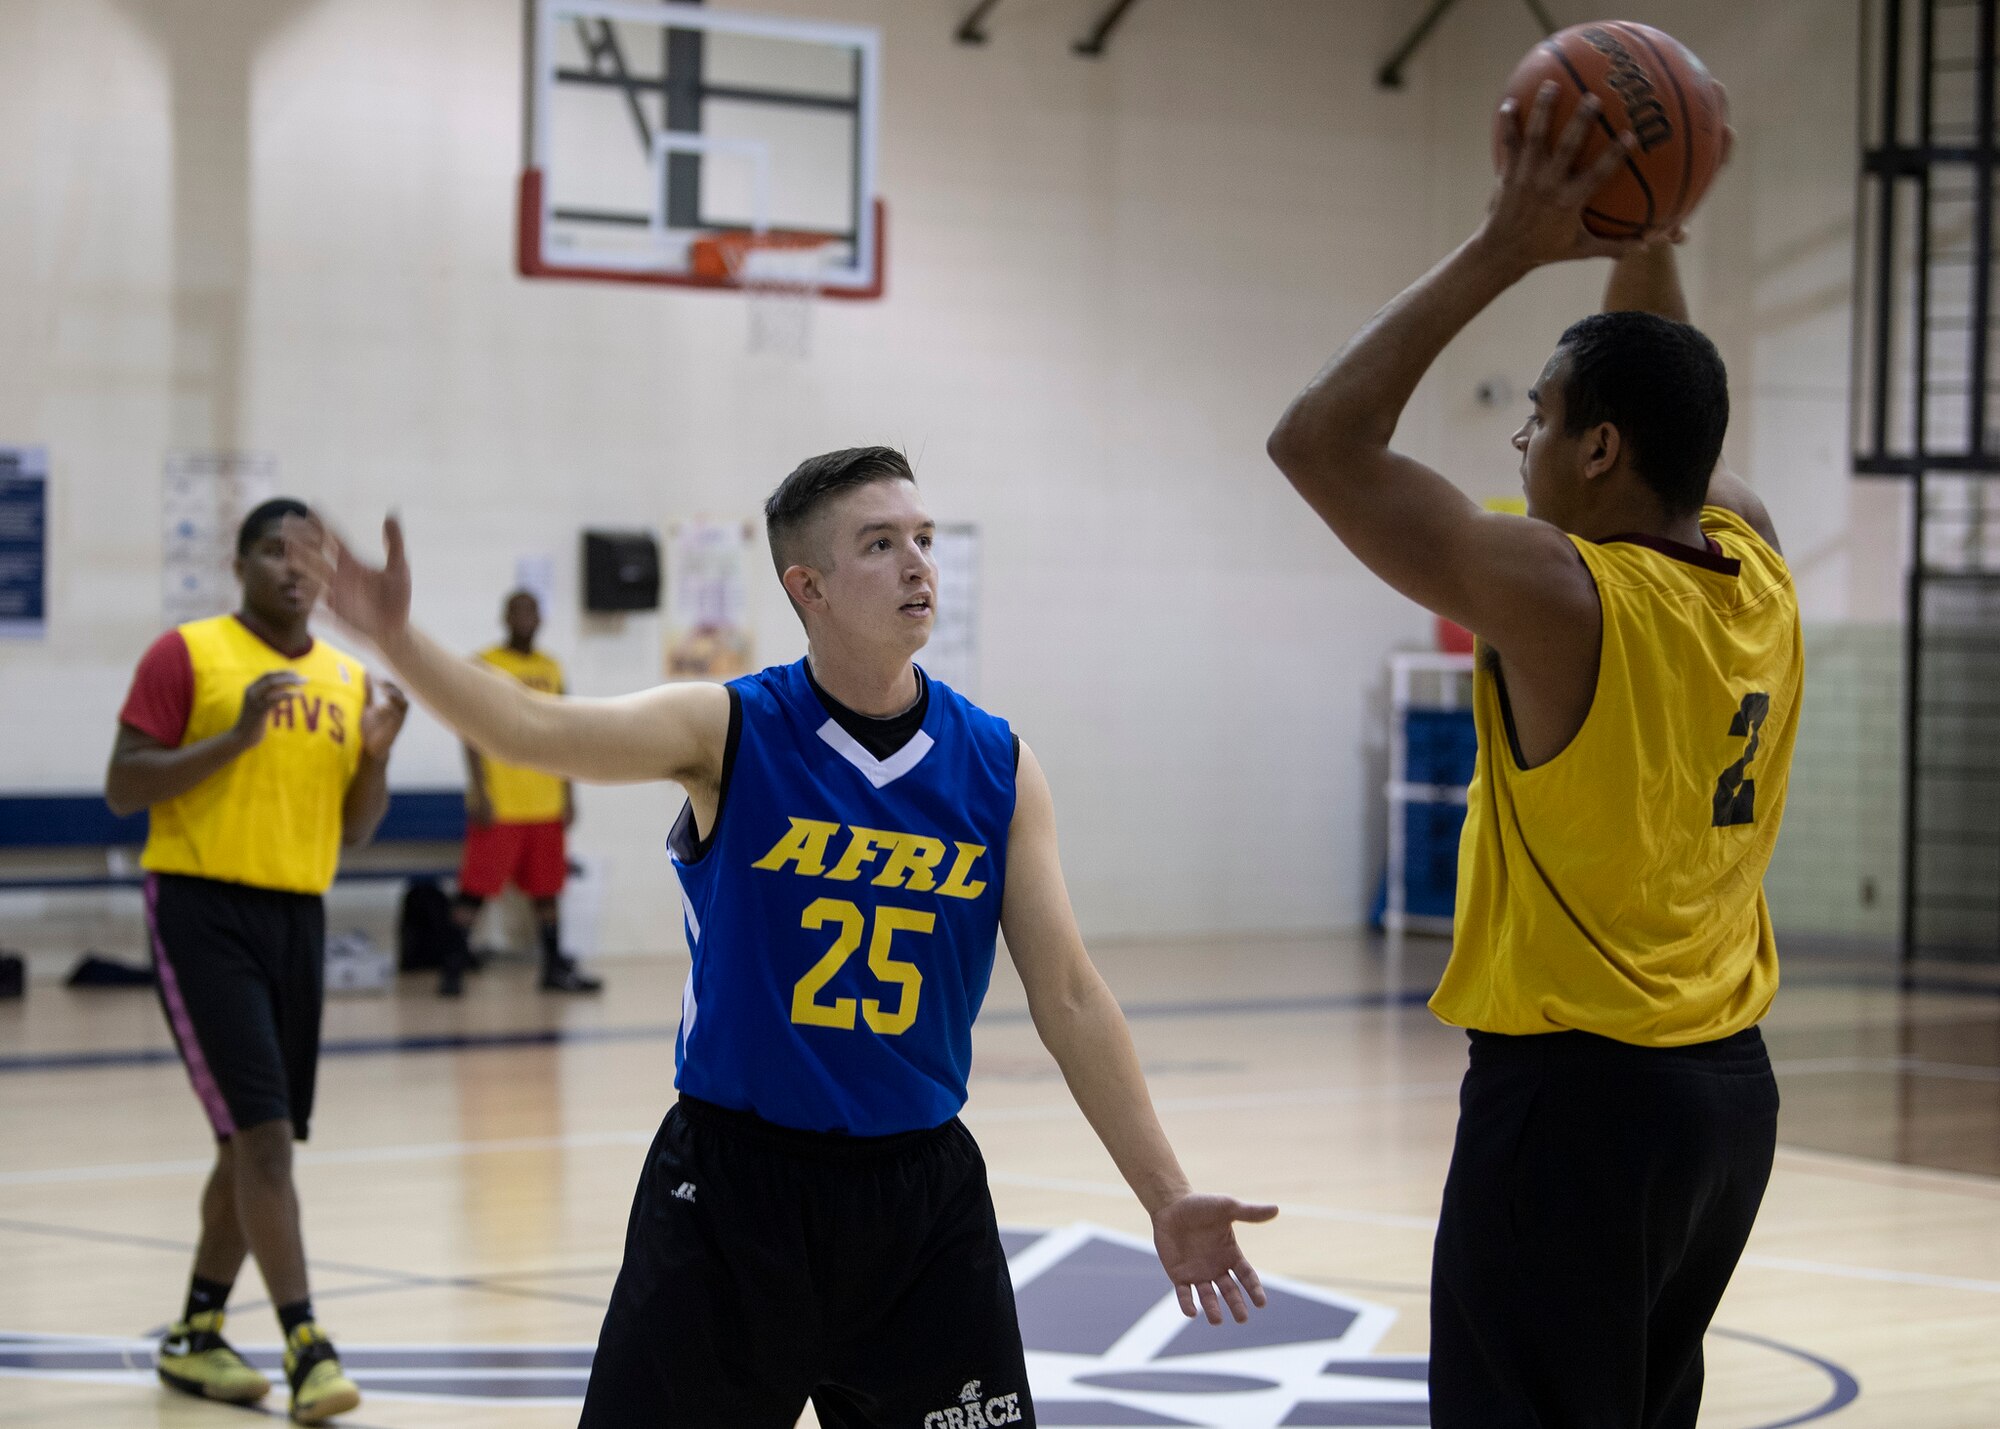 AFRL guard 1st Lt. Brennan Taylor tries to intercept an inbounds pass from WSSS-Lopez forward SrA Khalil Walton in an intramural basketball contest at Kirtland Air Force Base, N.M., Jan. 17, 2019. Taylor and AFRL defeated WSSS-Lopez in an upset victory 47-41. (U.S. Air Force photo by Staff Sgt. J.D. Strong II)